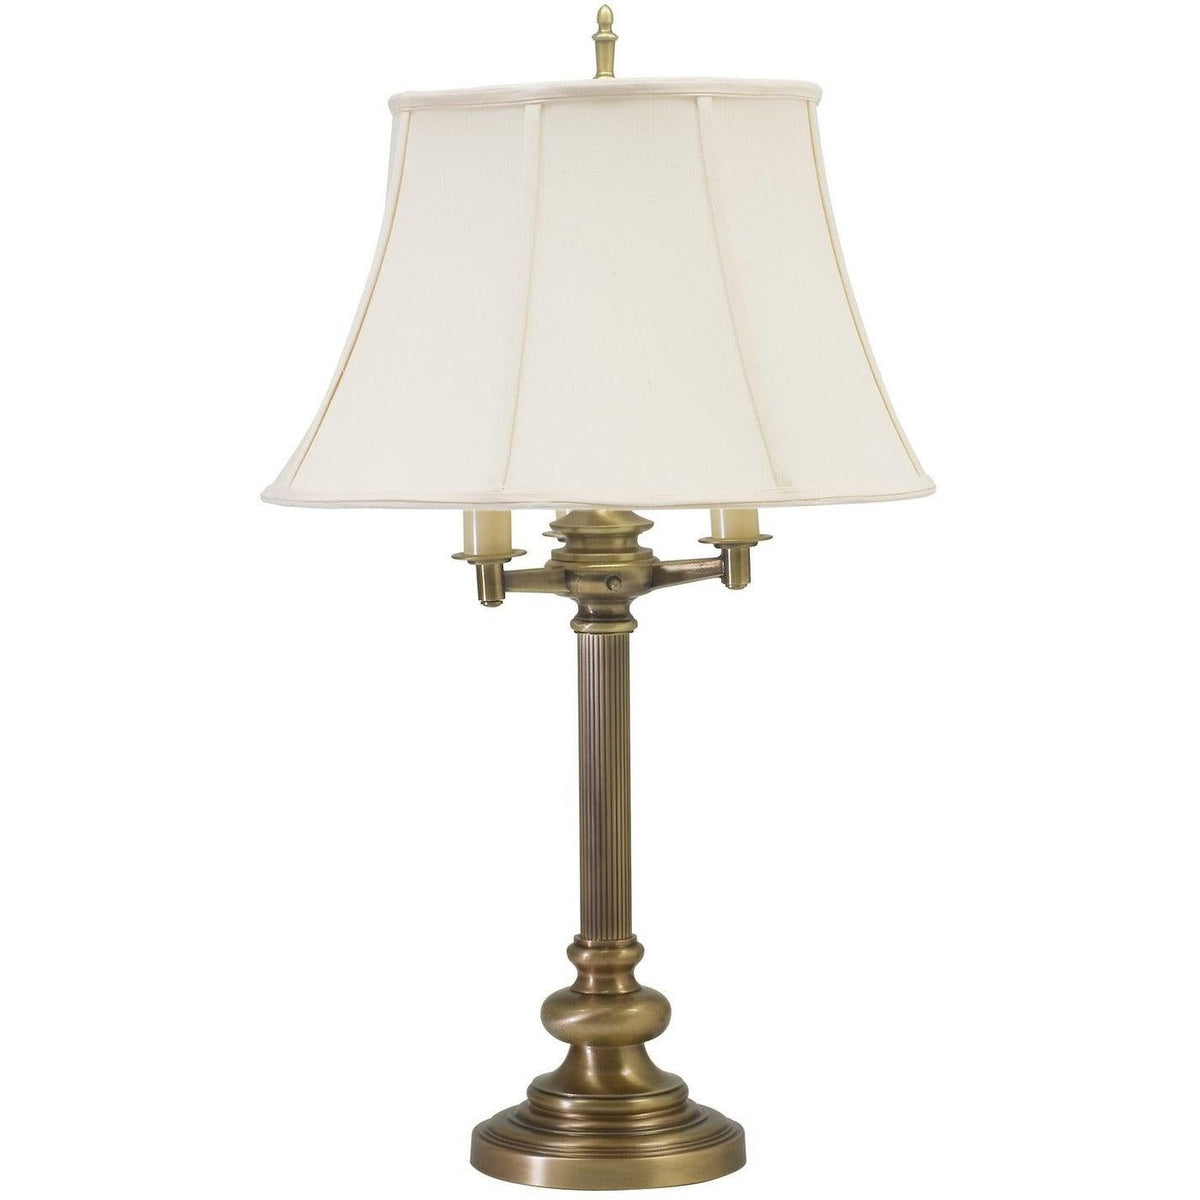 House of Troy - Newport Four Light Table Lamp - N650-AB | Montreal Lighting & Hardware